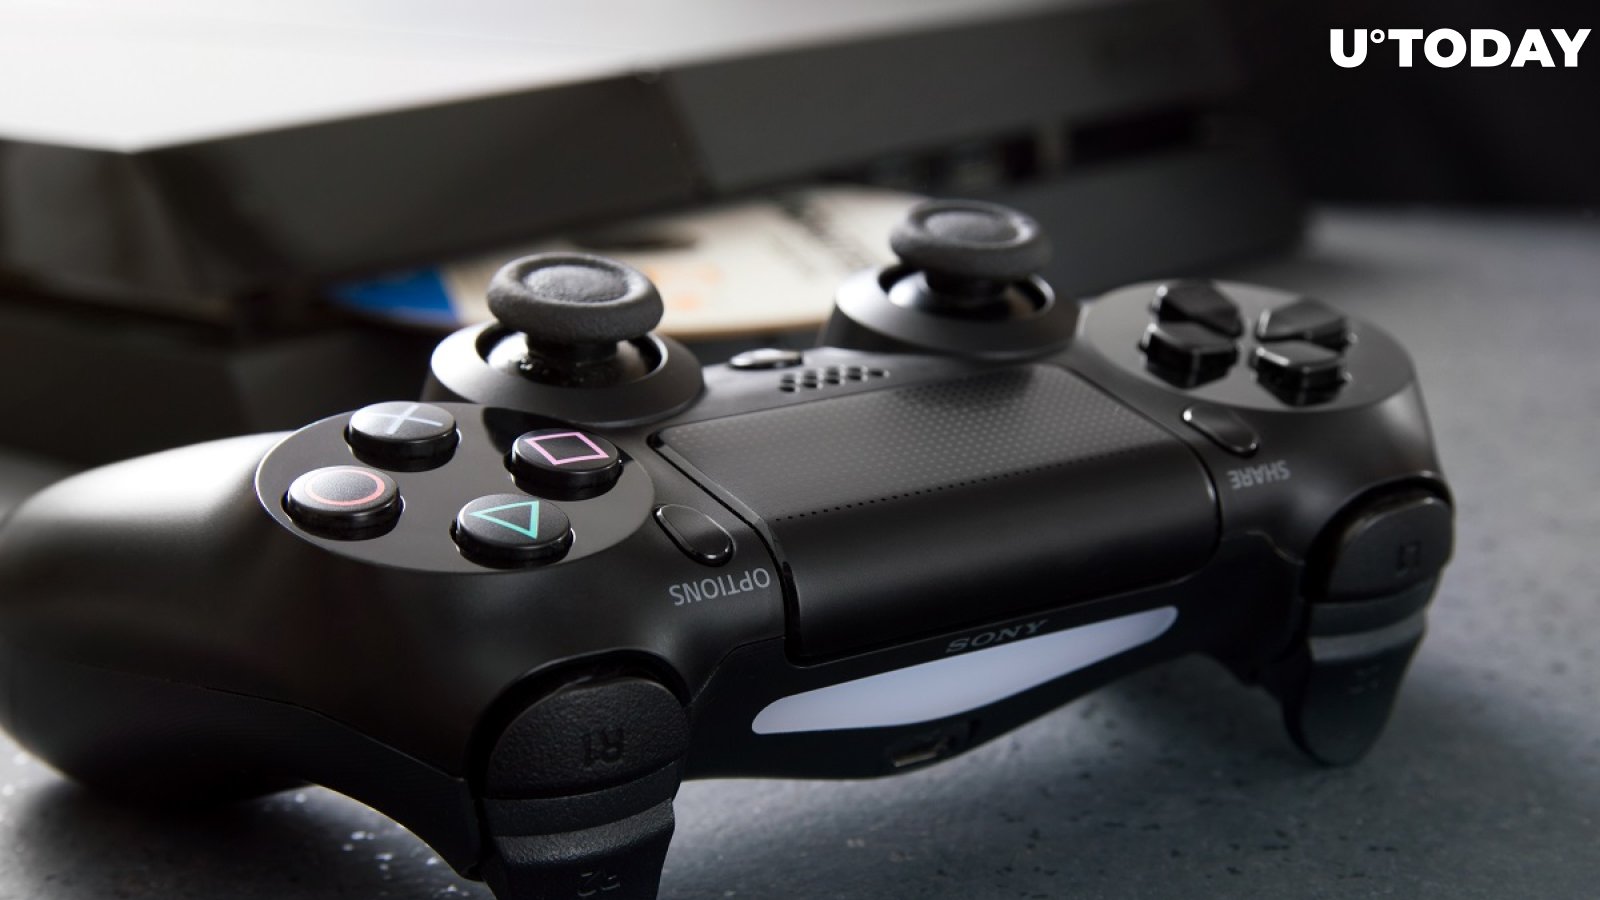 You Can Now Collect $50,000 Bounty by Finding Critical Bugs in Sony PlayStation 4